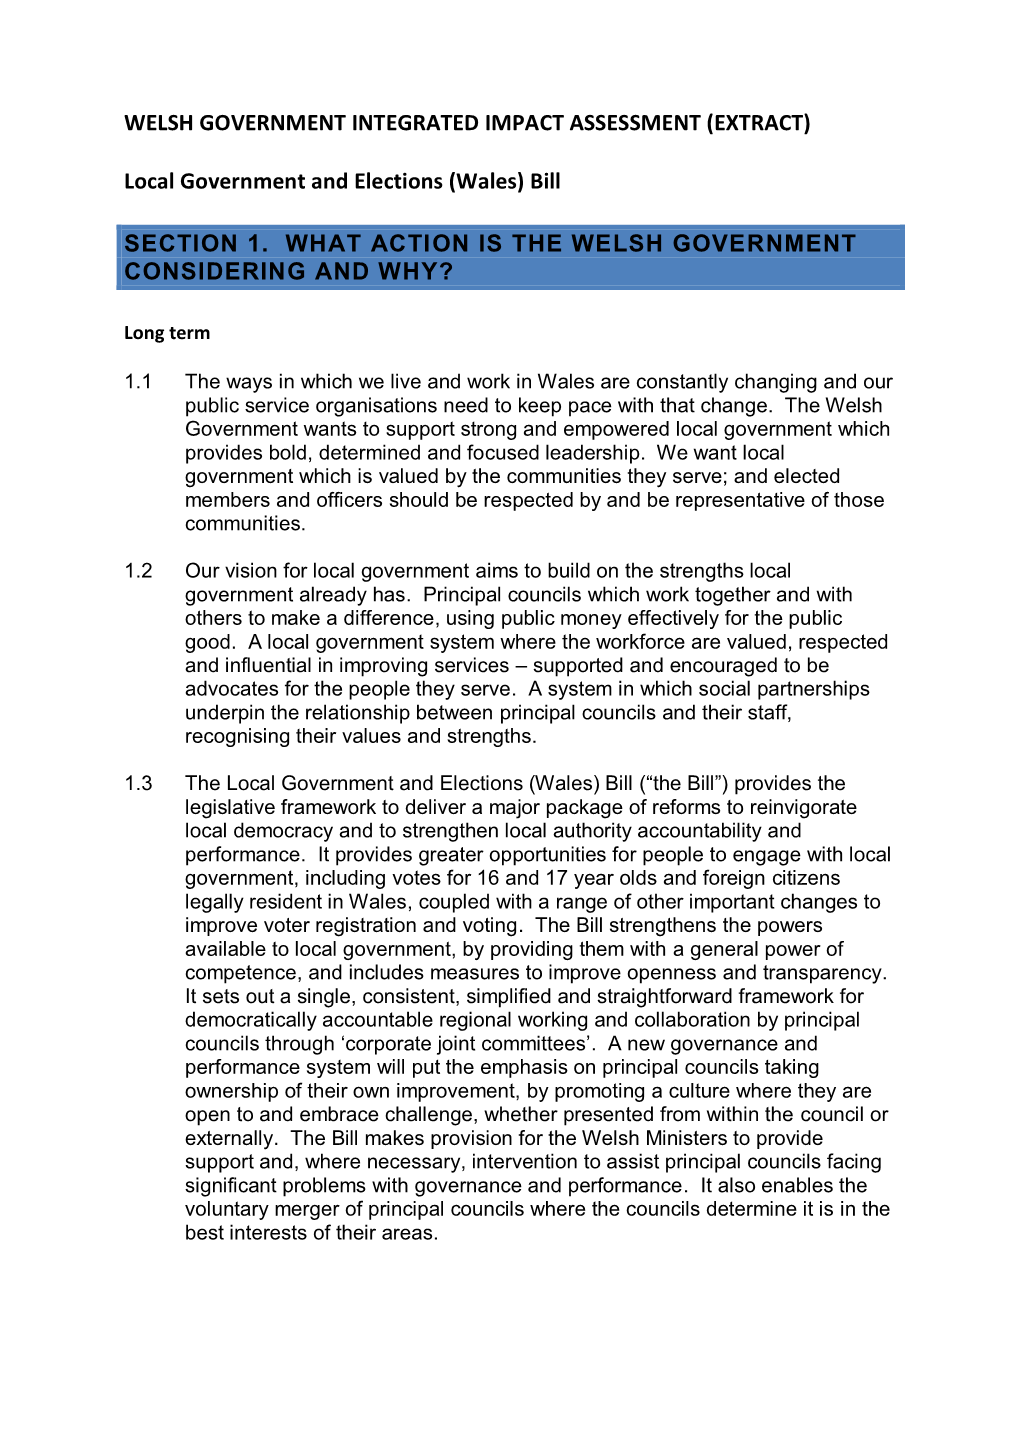 Local Government and Elections (Wales) Bill